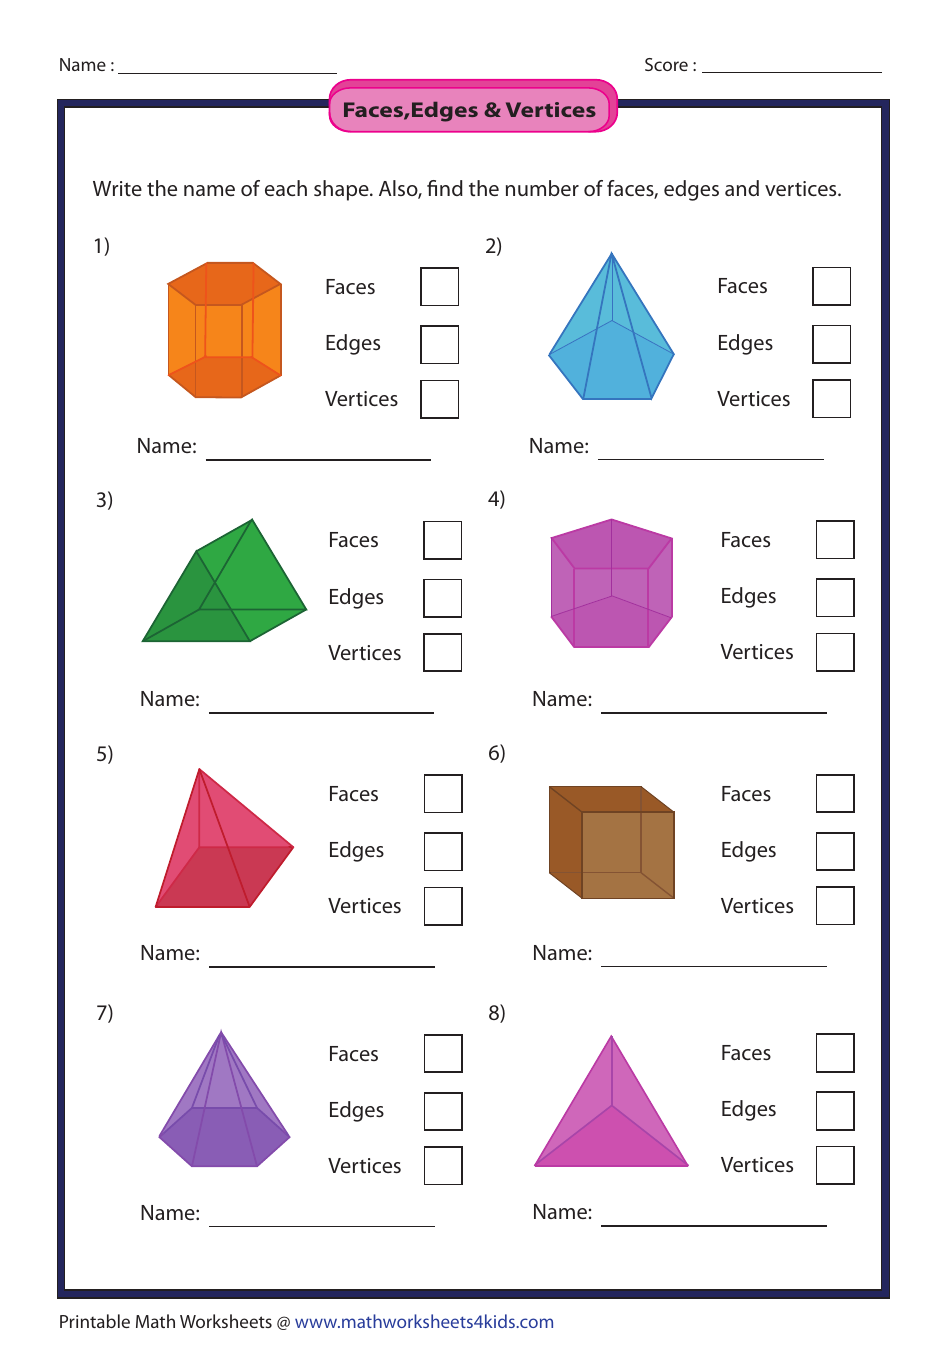 faces-edges-vertices-worksheet-with-answers-download-printable-pdf